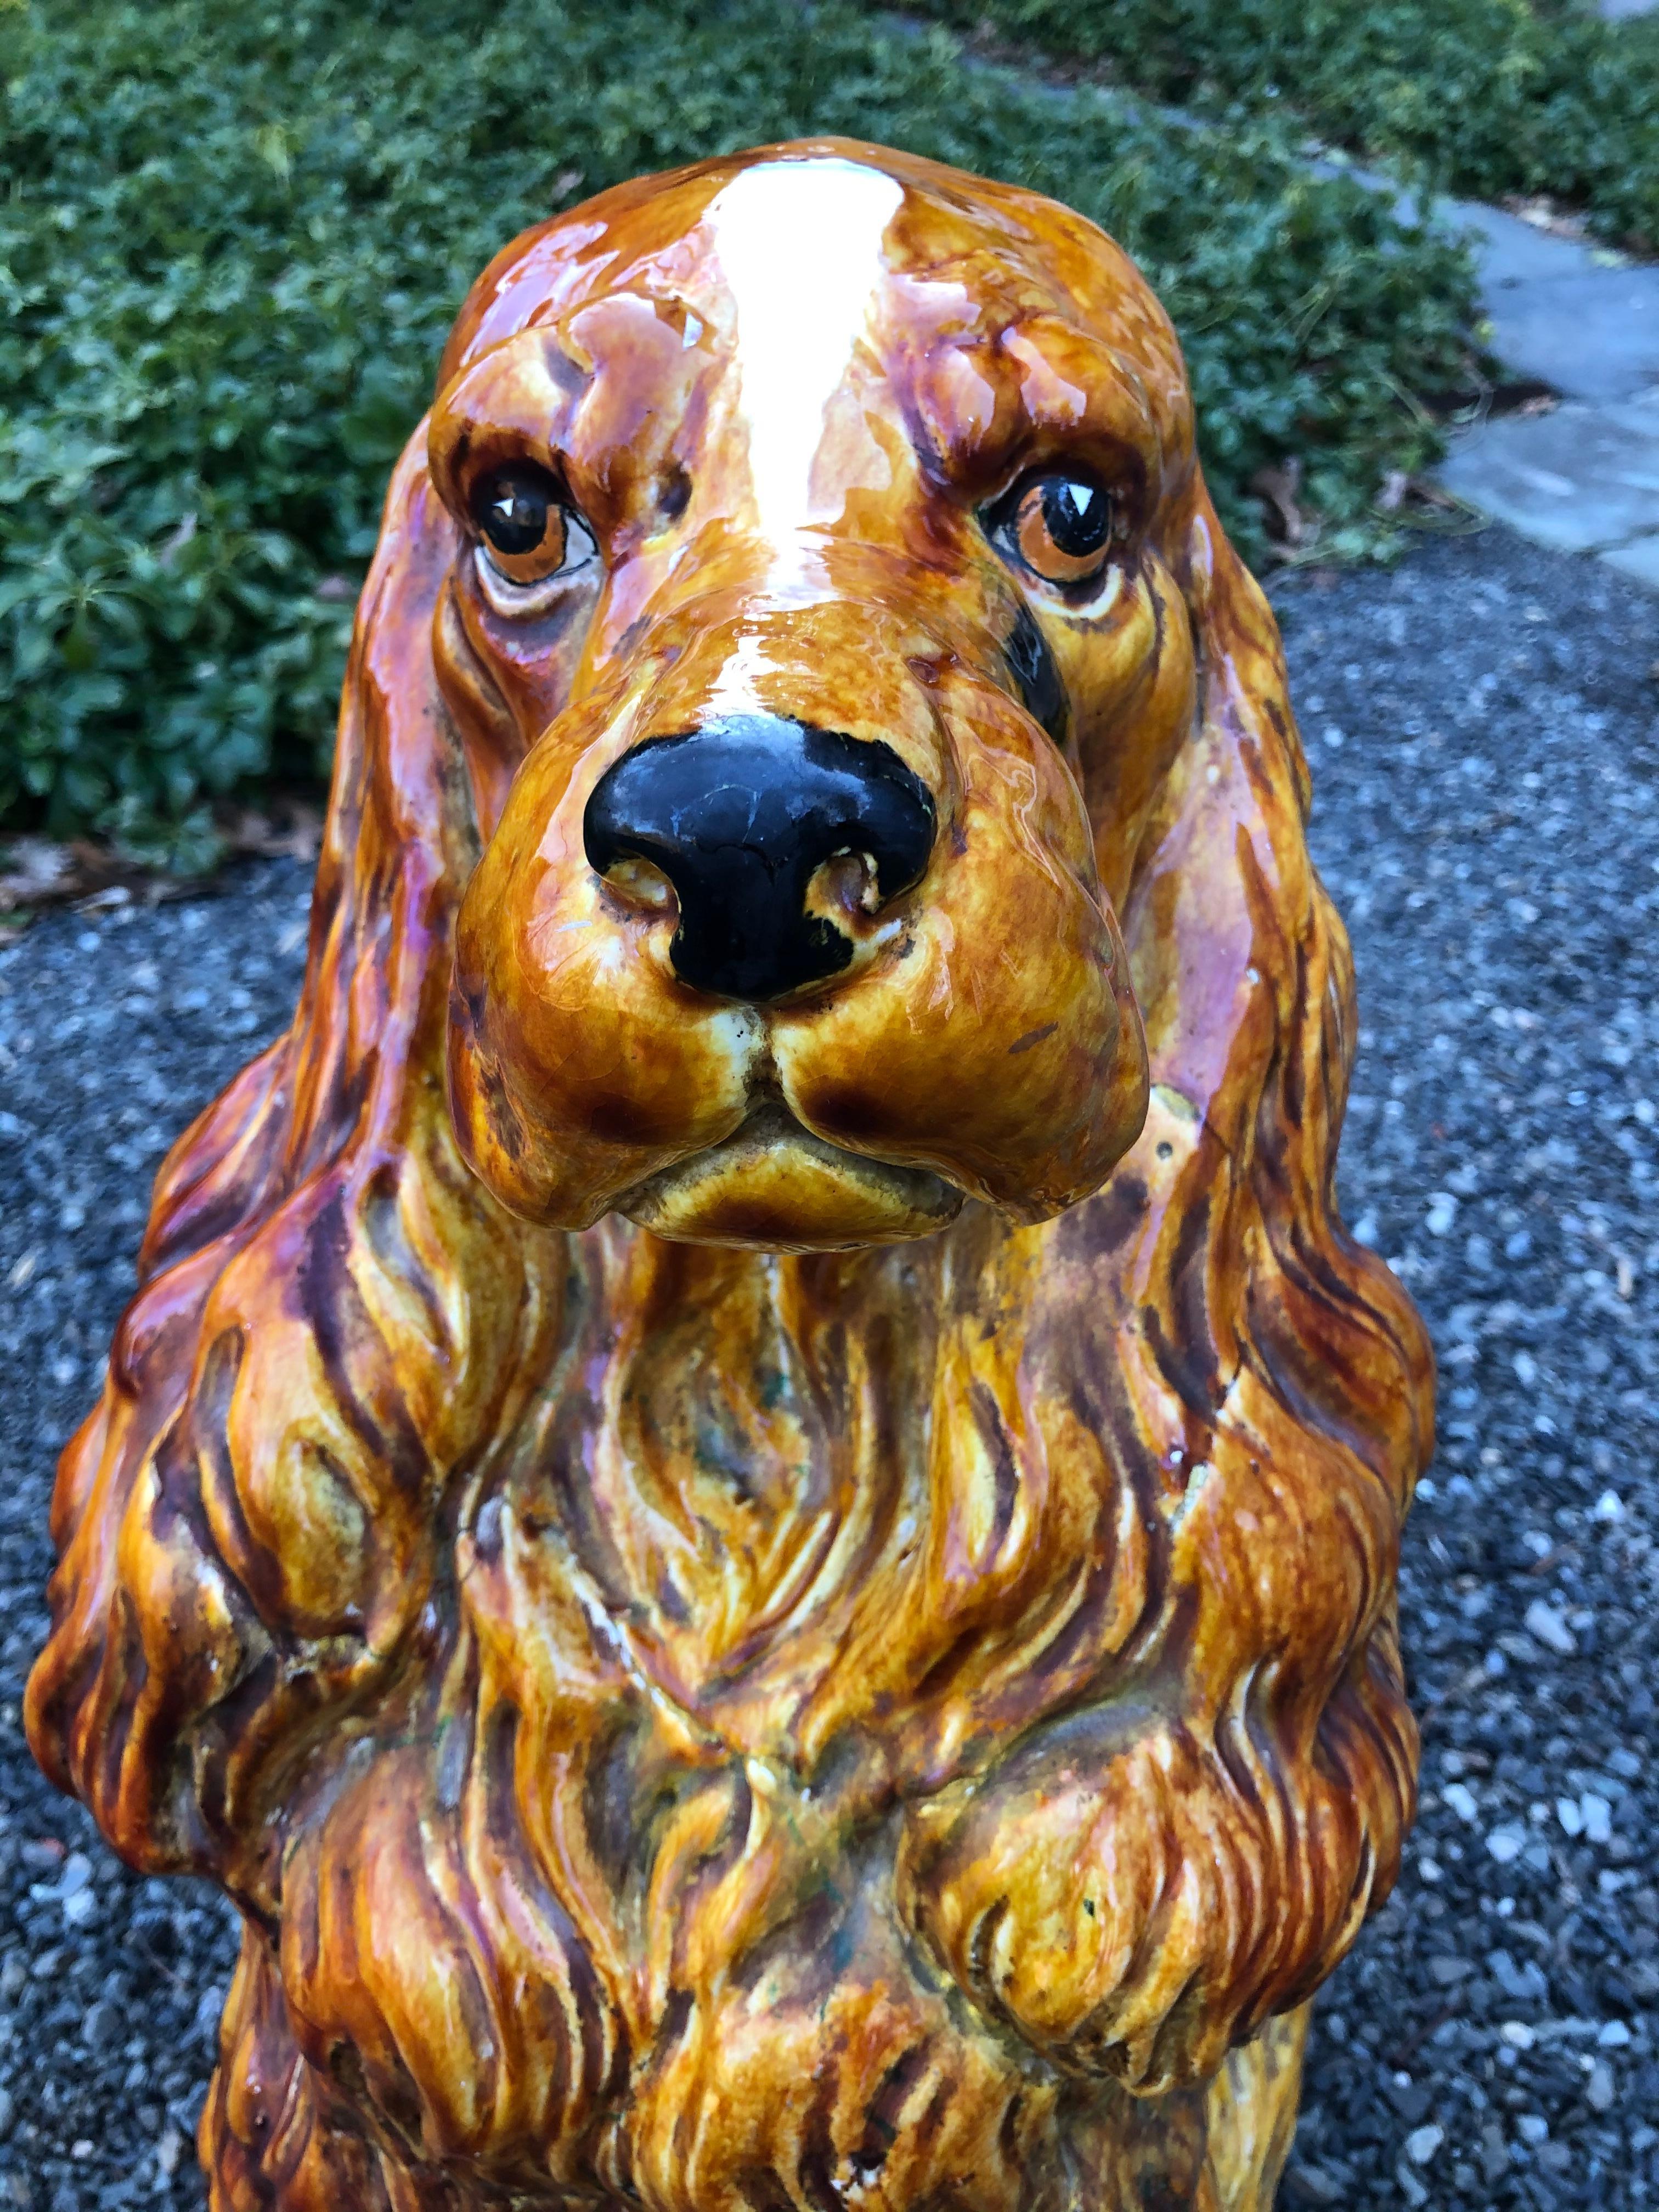 Bigger than life-size charming ceramic statuette of an English cocker spaniel. Known as liver color, this dog has a white star on its head. It’s coat is very realistic and it’s expression priceless. Very heavy.